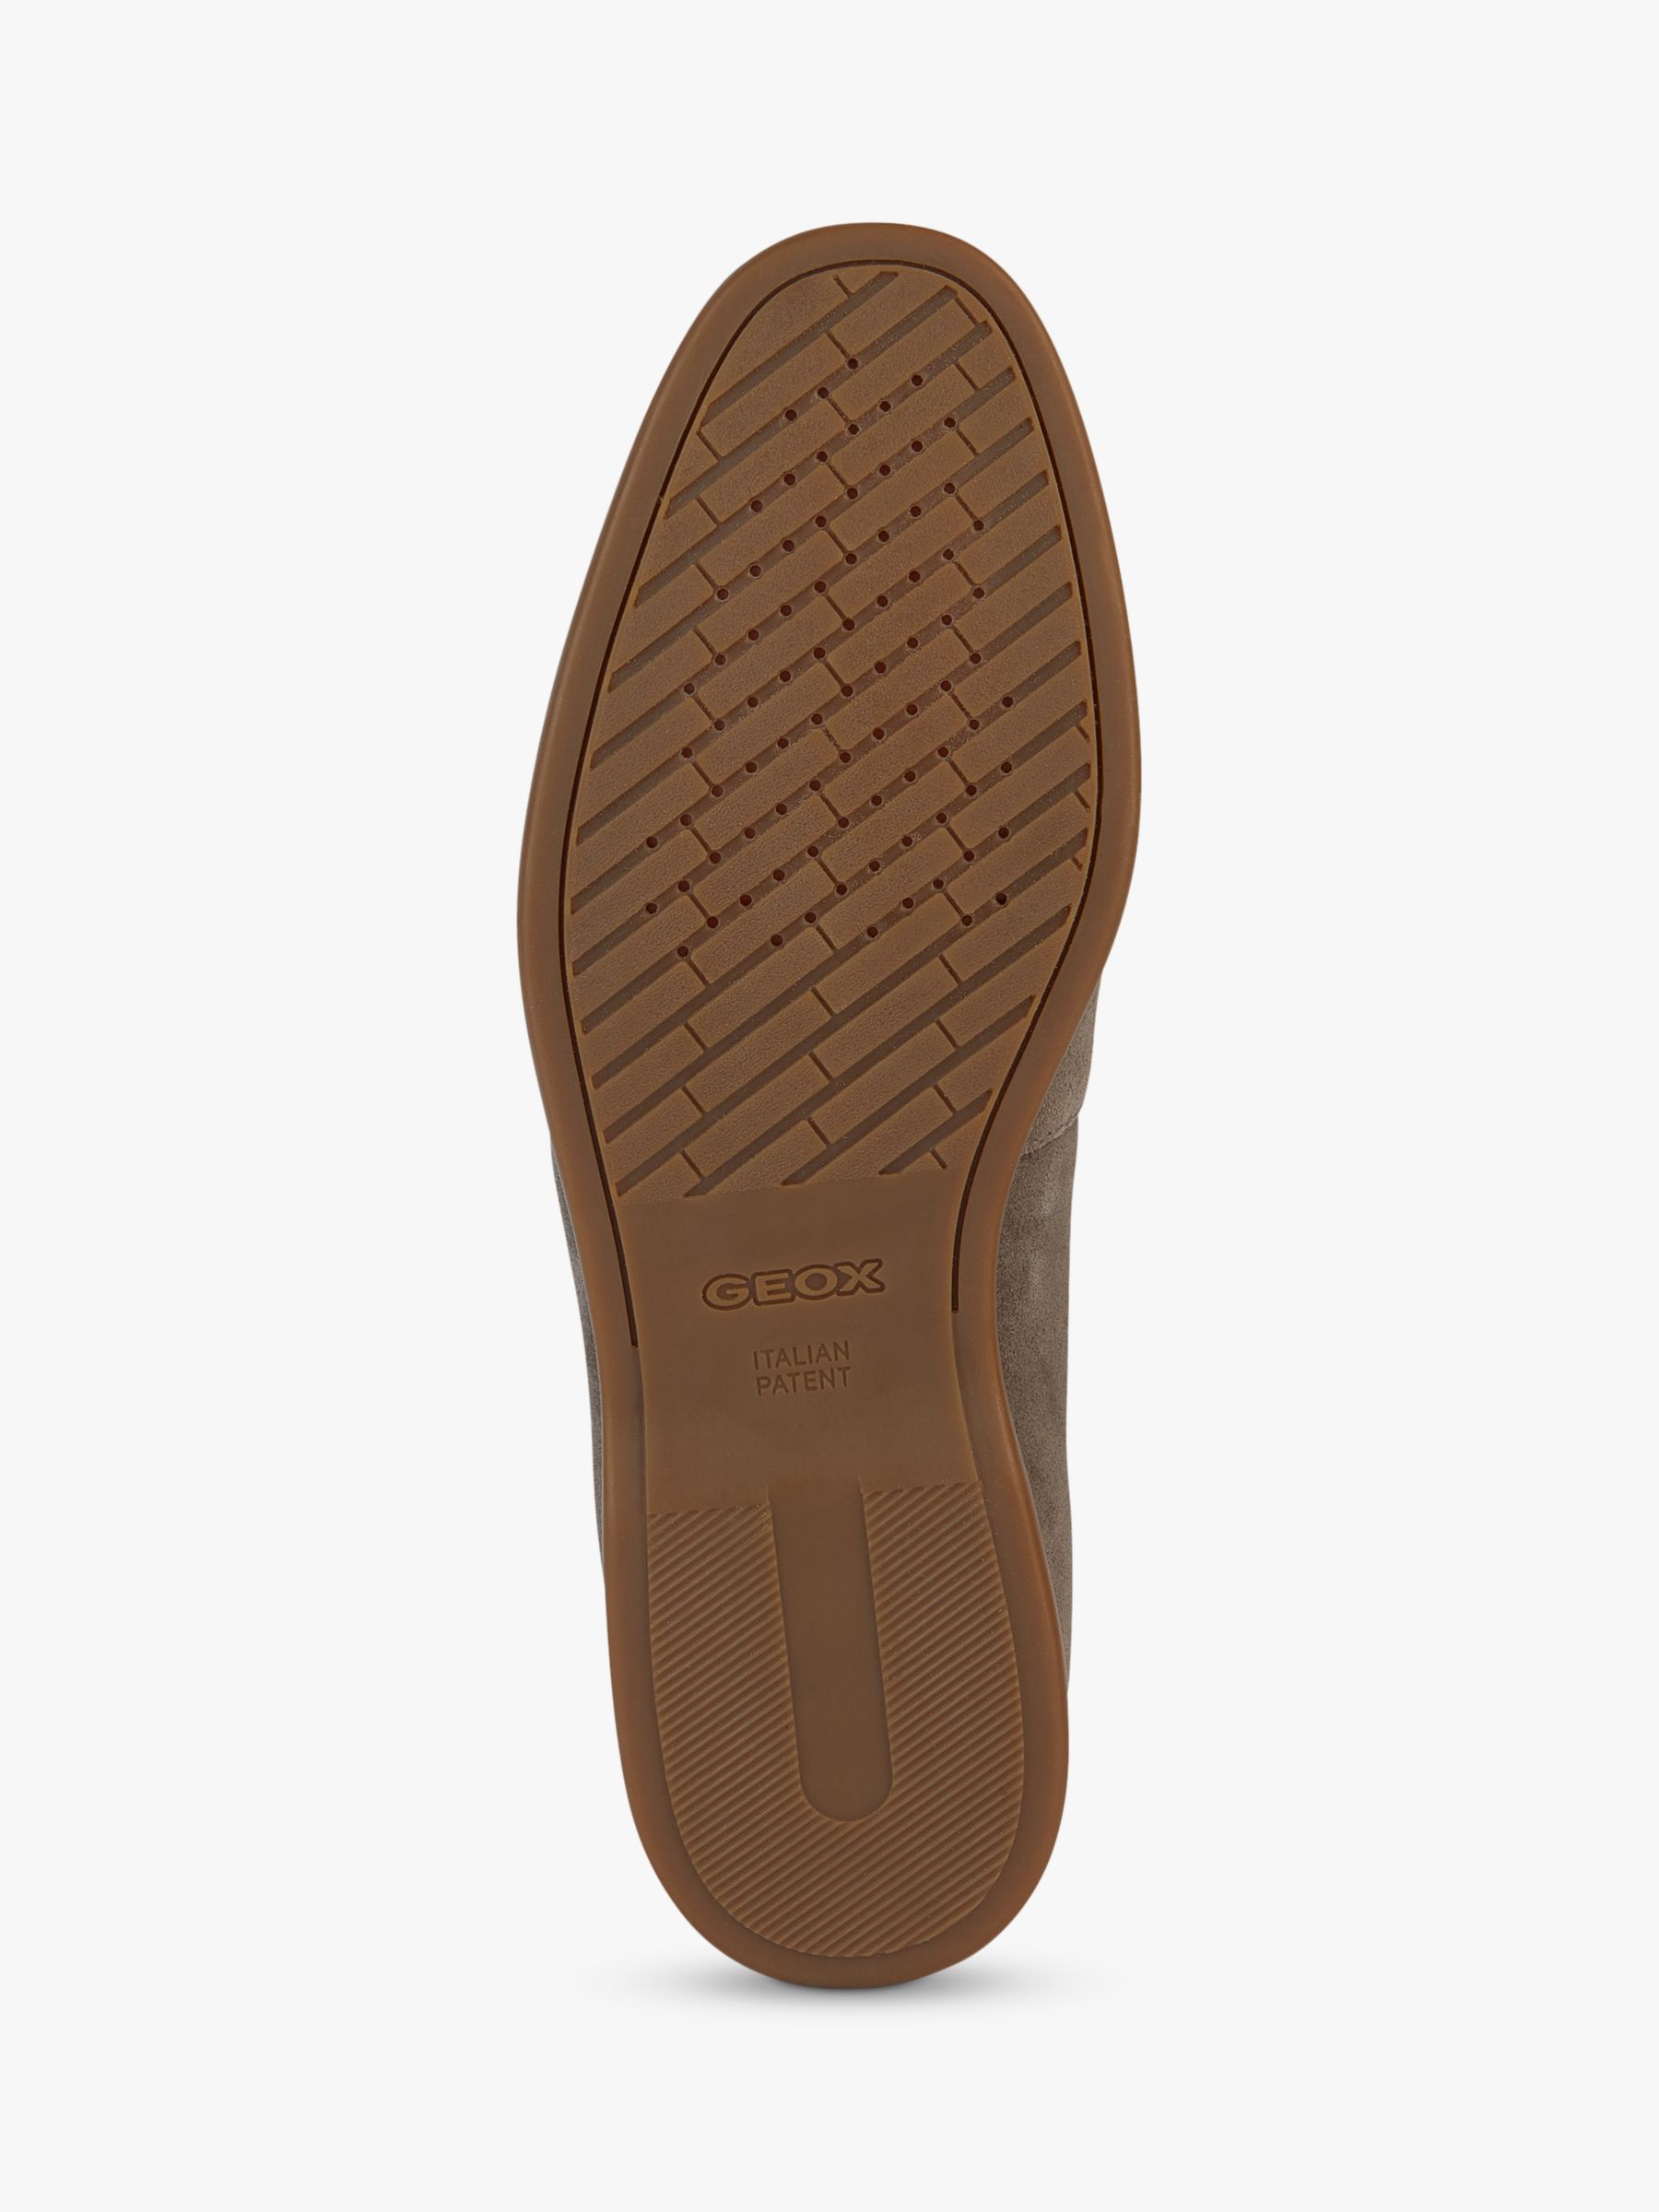 Geox Venzone Loafers, Taupe, EU41